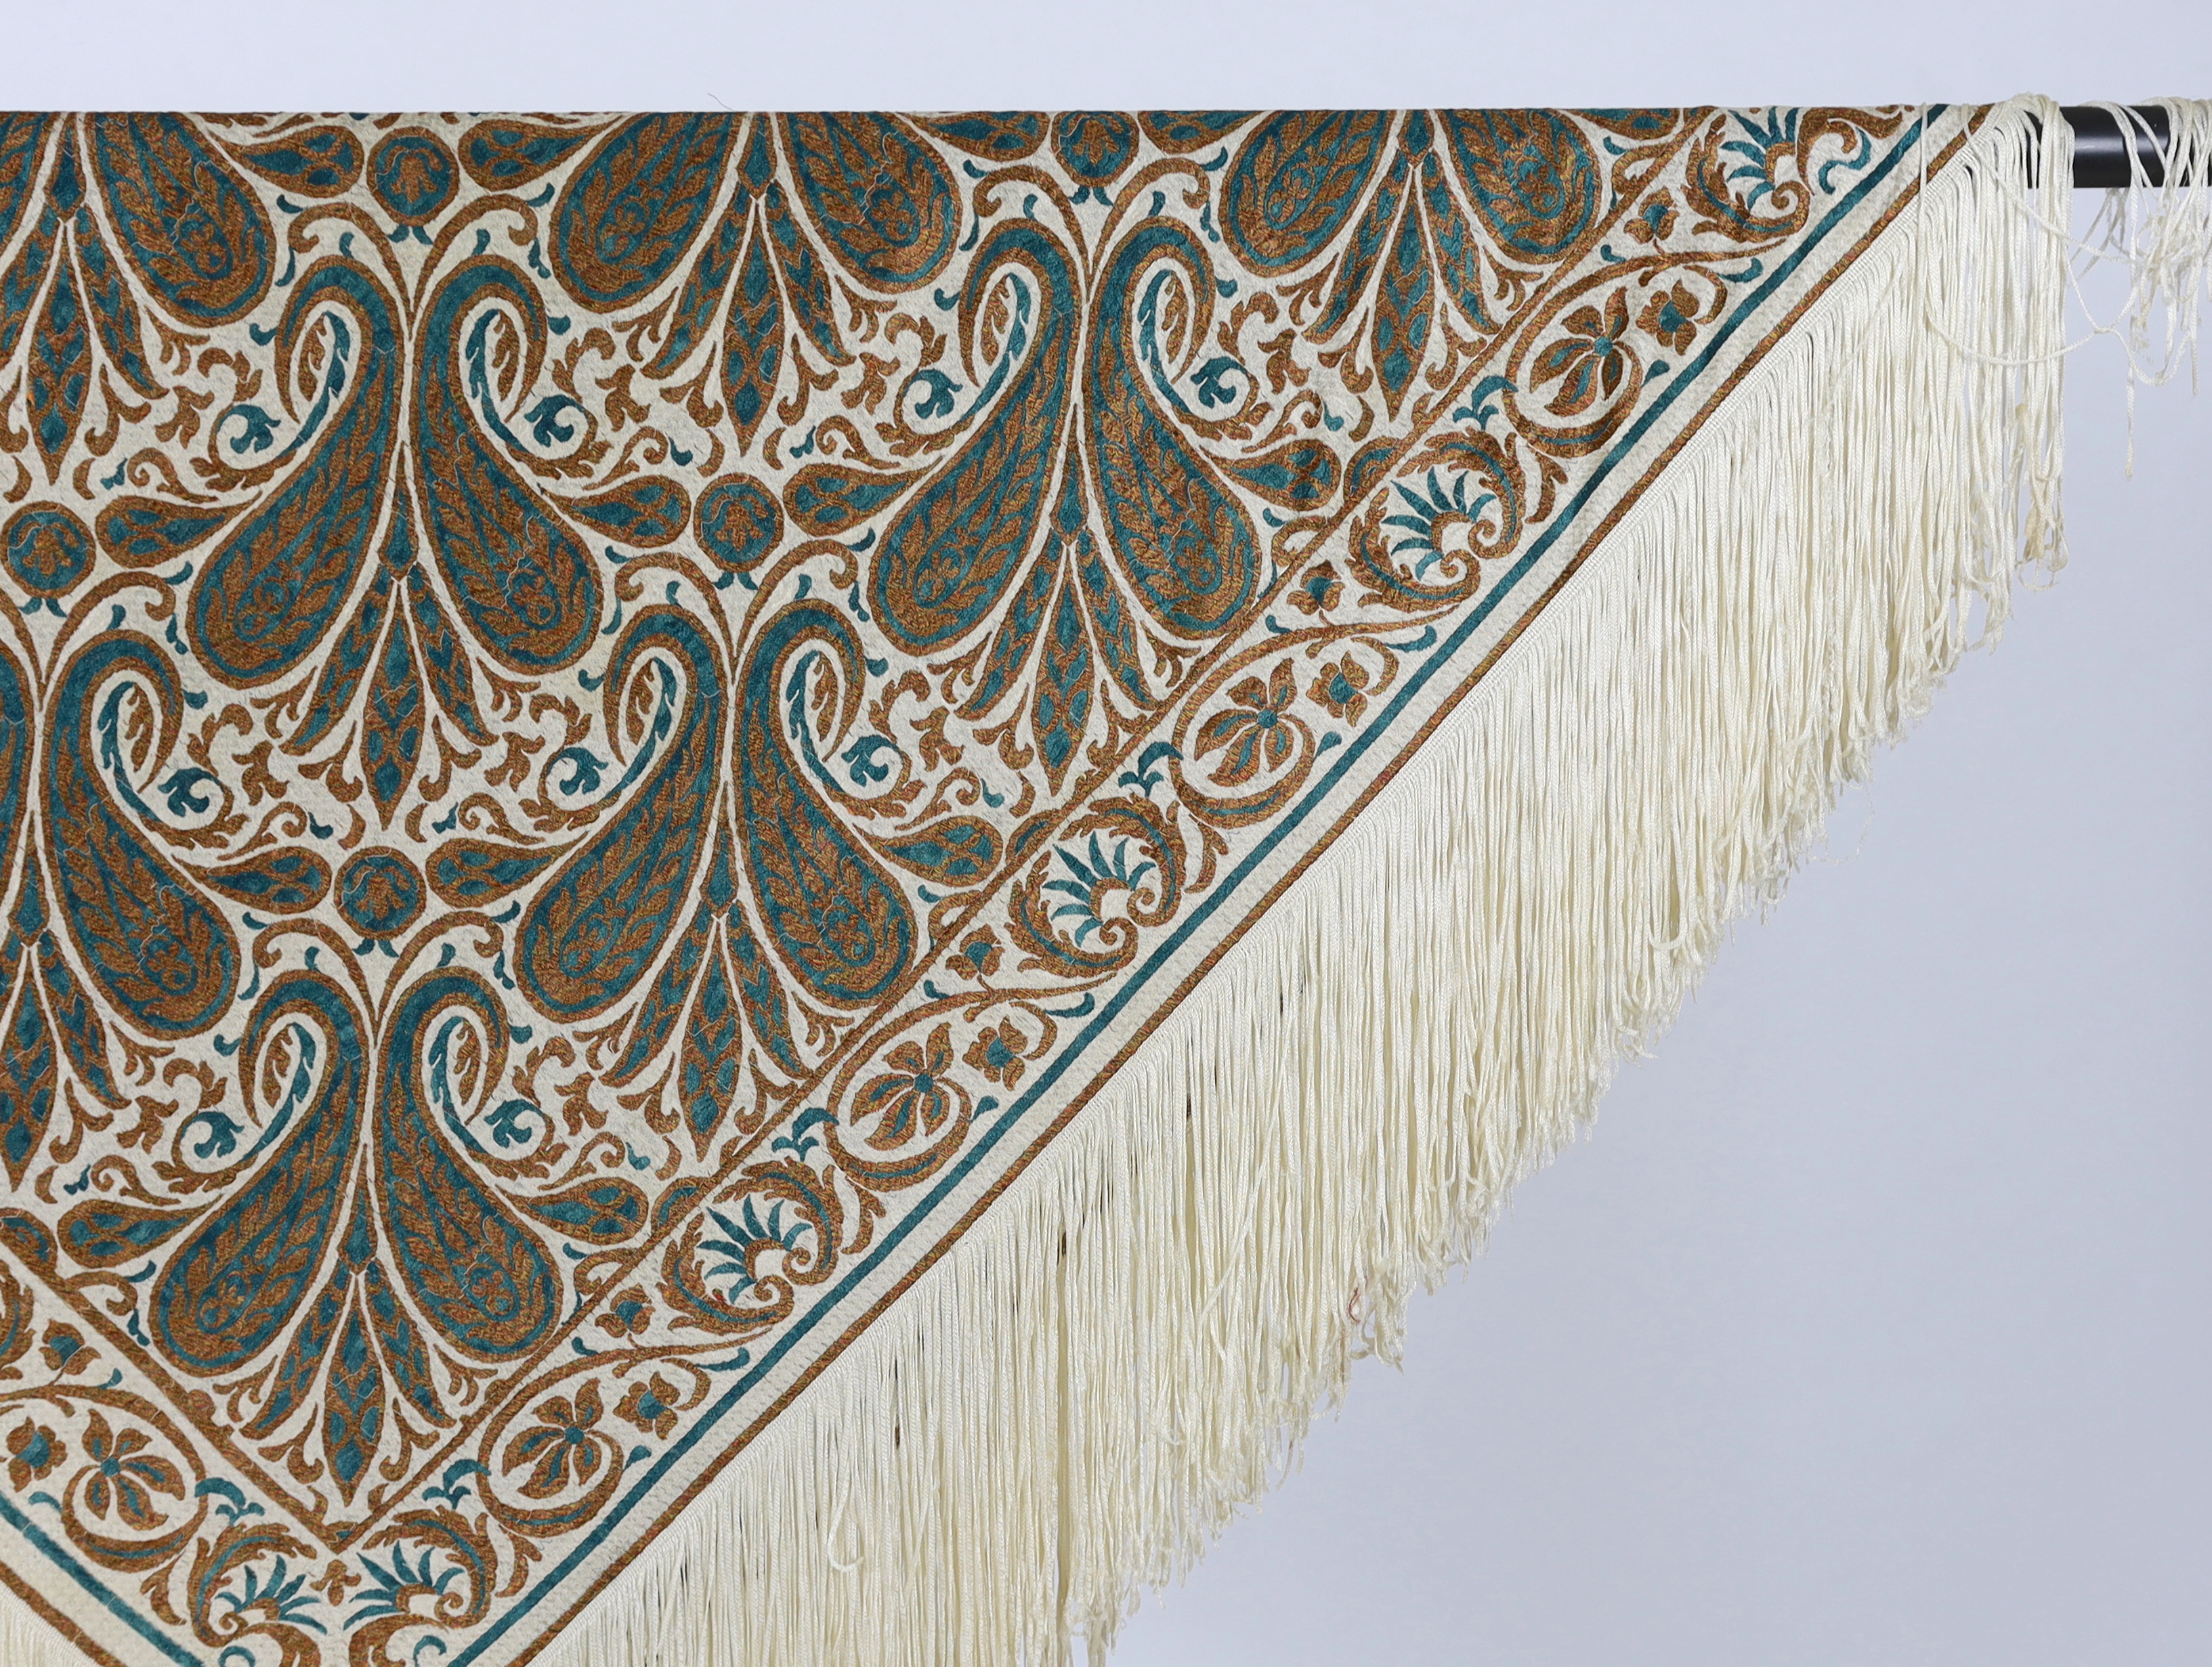 A 1920’s-1930’s cream silk woven shawl, woven with turquoise and bronze coloured silks in an all over tear drop paisley motif, edged with fine knitted cream fringing, approximately 109cm x 120cm